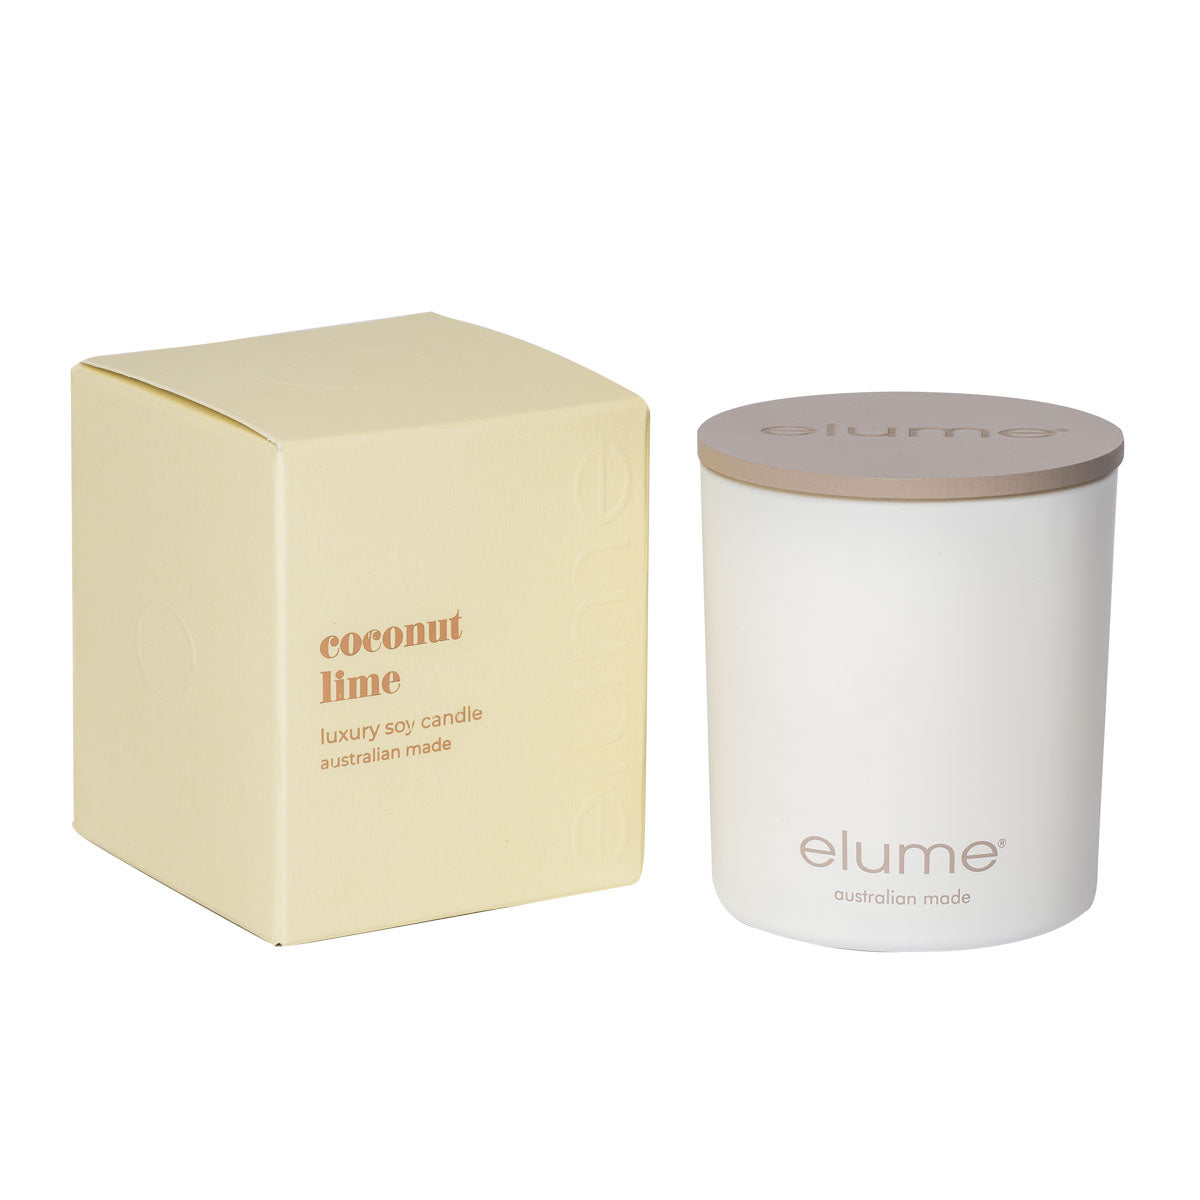 Coconut Lime : Elume Luxury Soy Candle